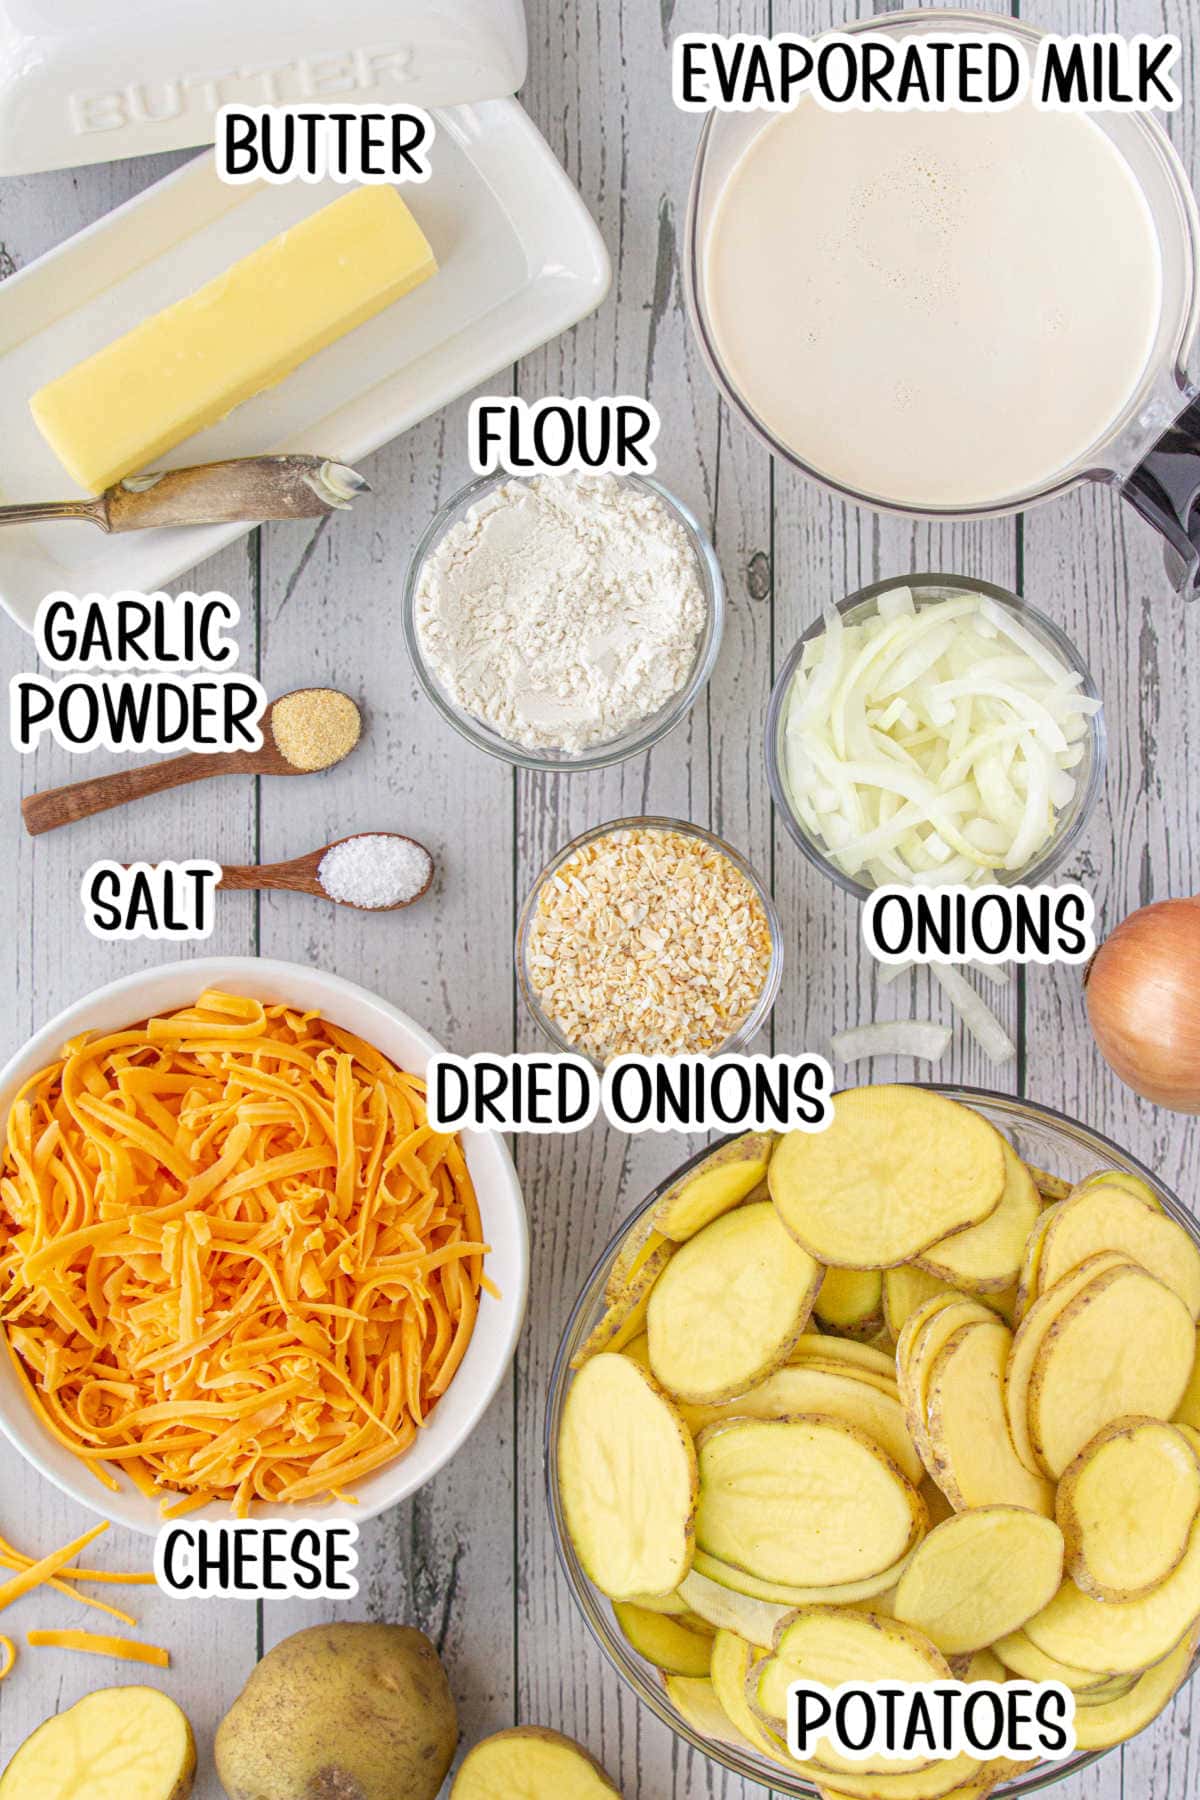 Labeled ingredients for au gratin potatoes.